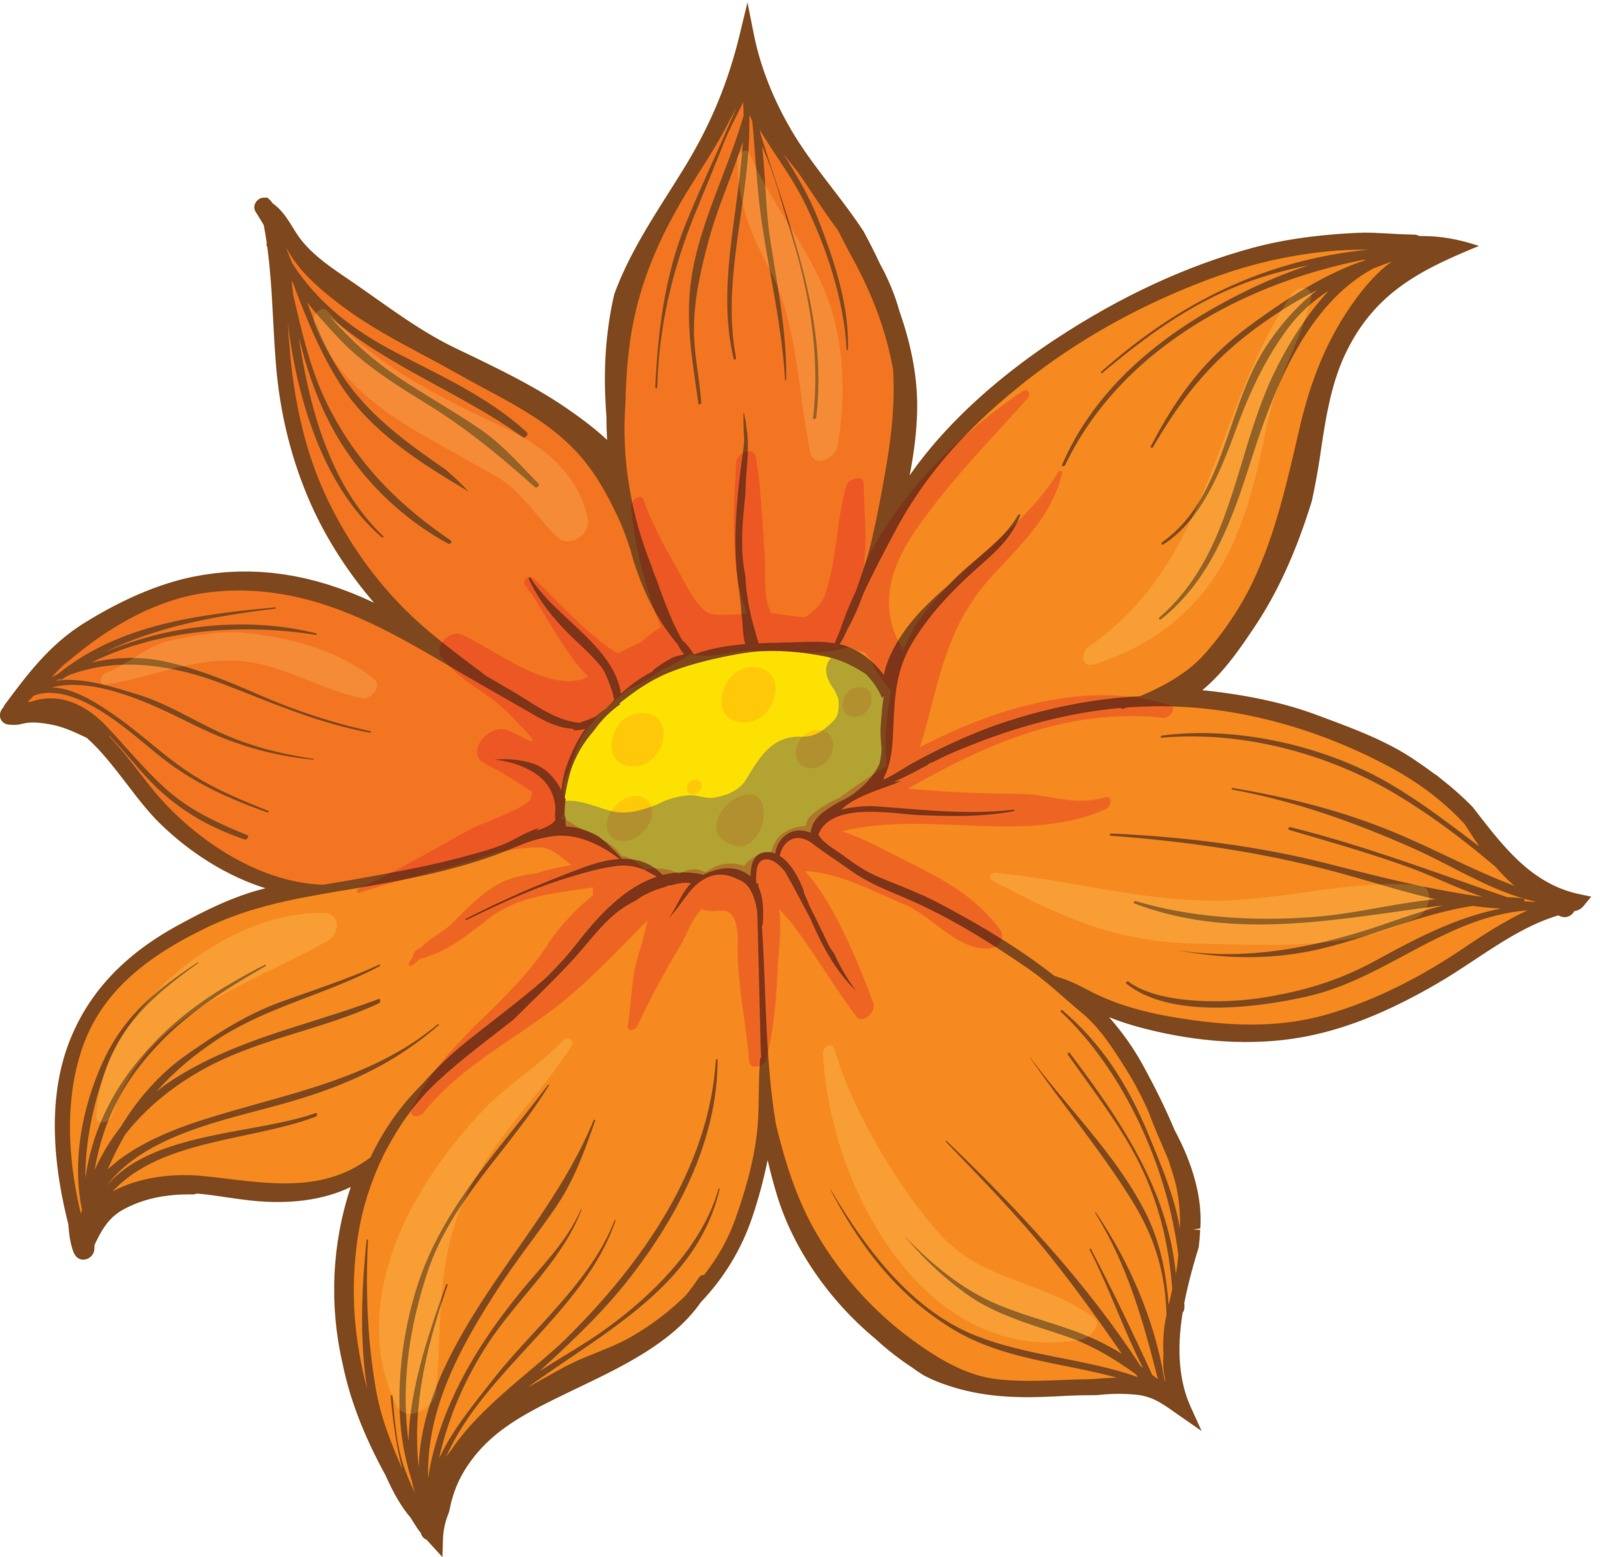 Illustration of a flower on a white background